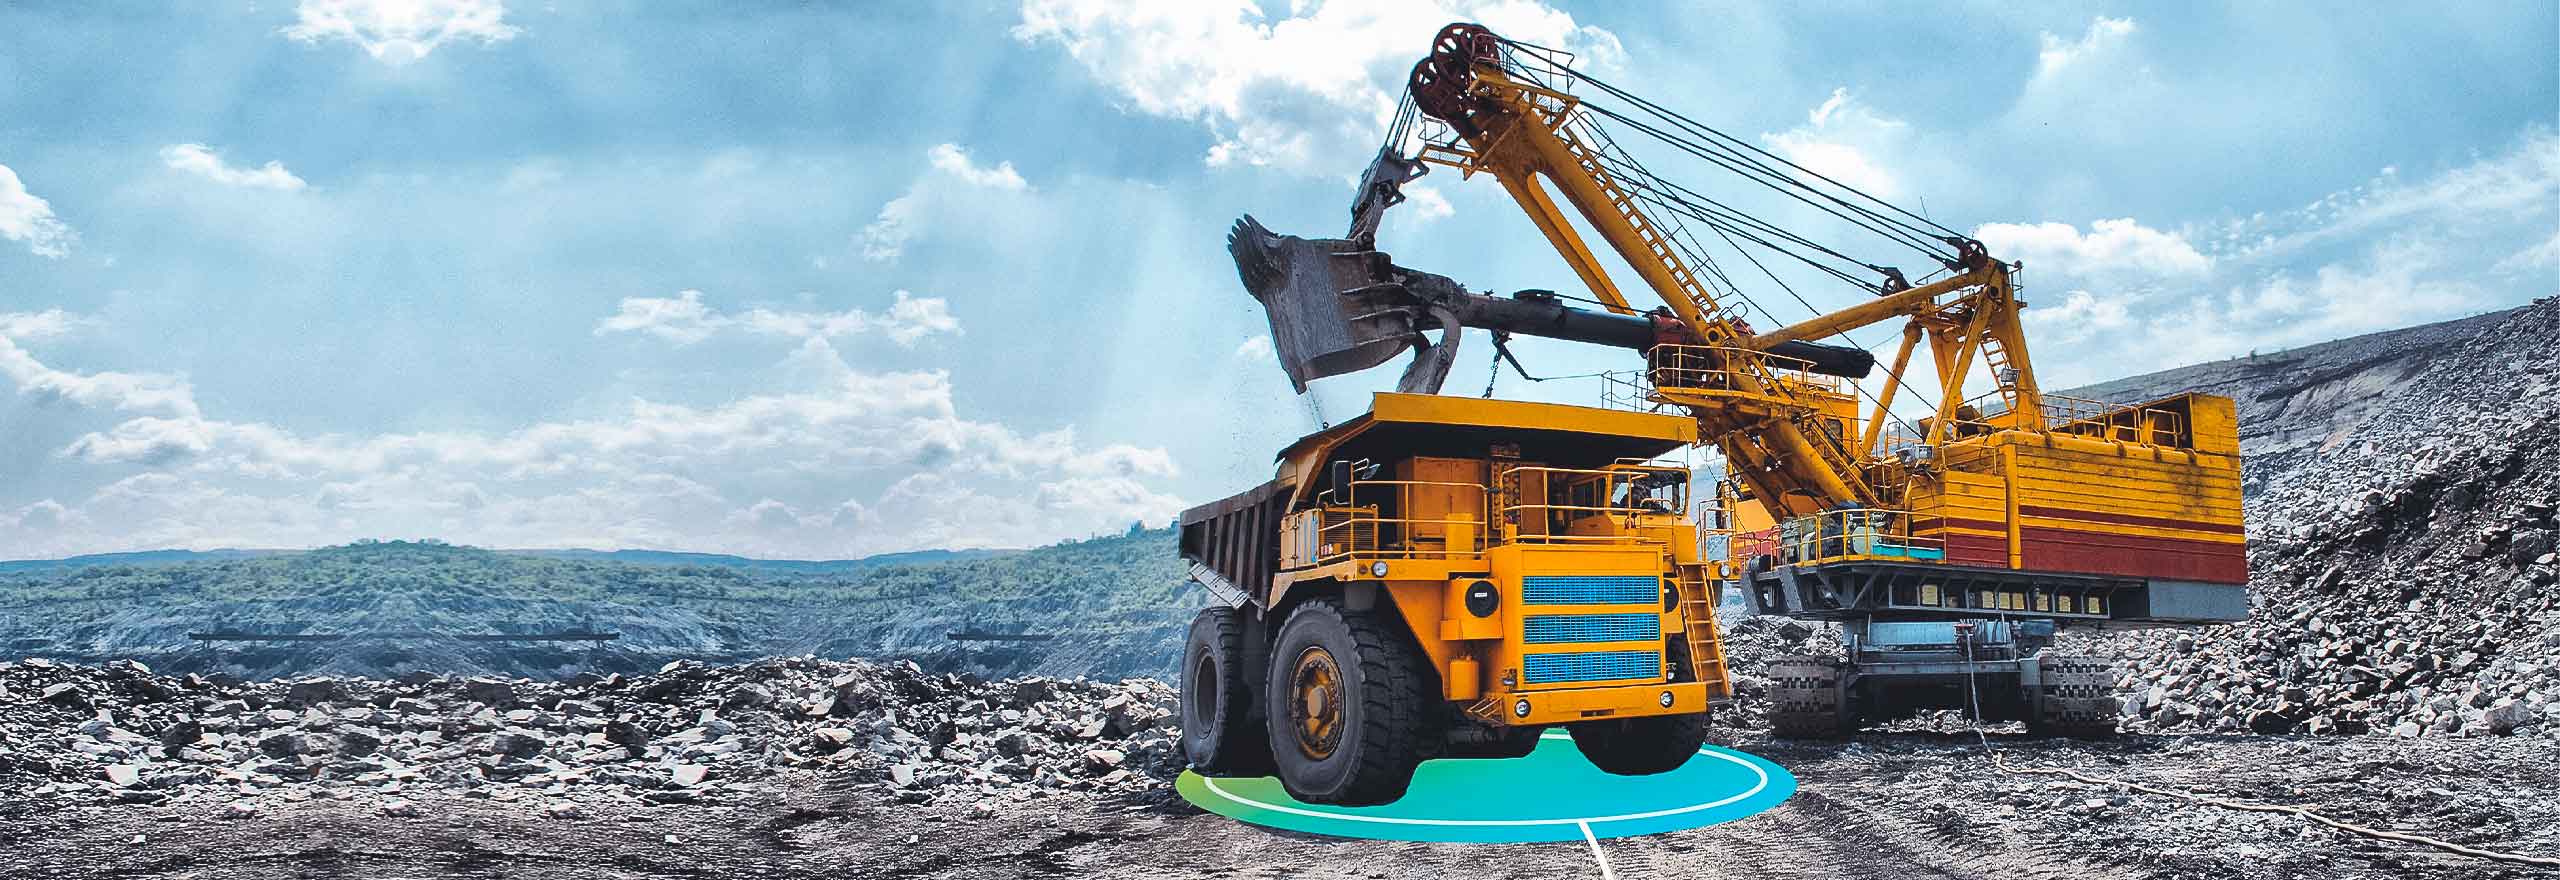 Haul truck and graphic illustrating Hexagon's reverse assist capability